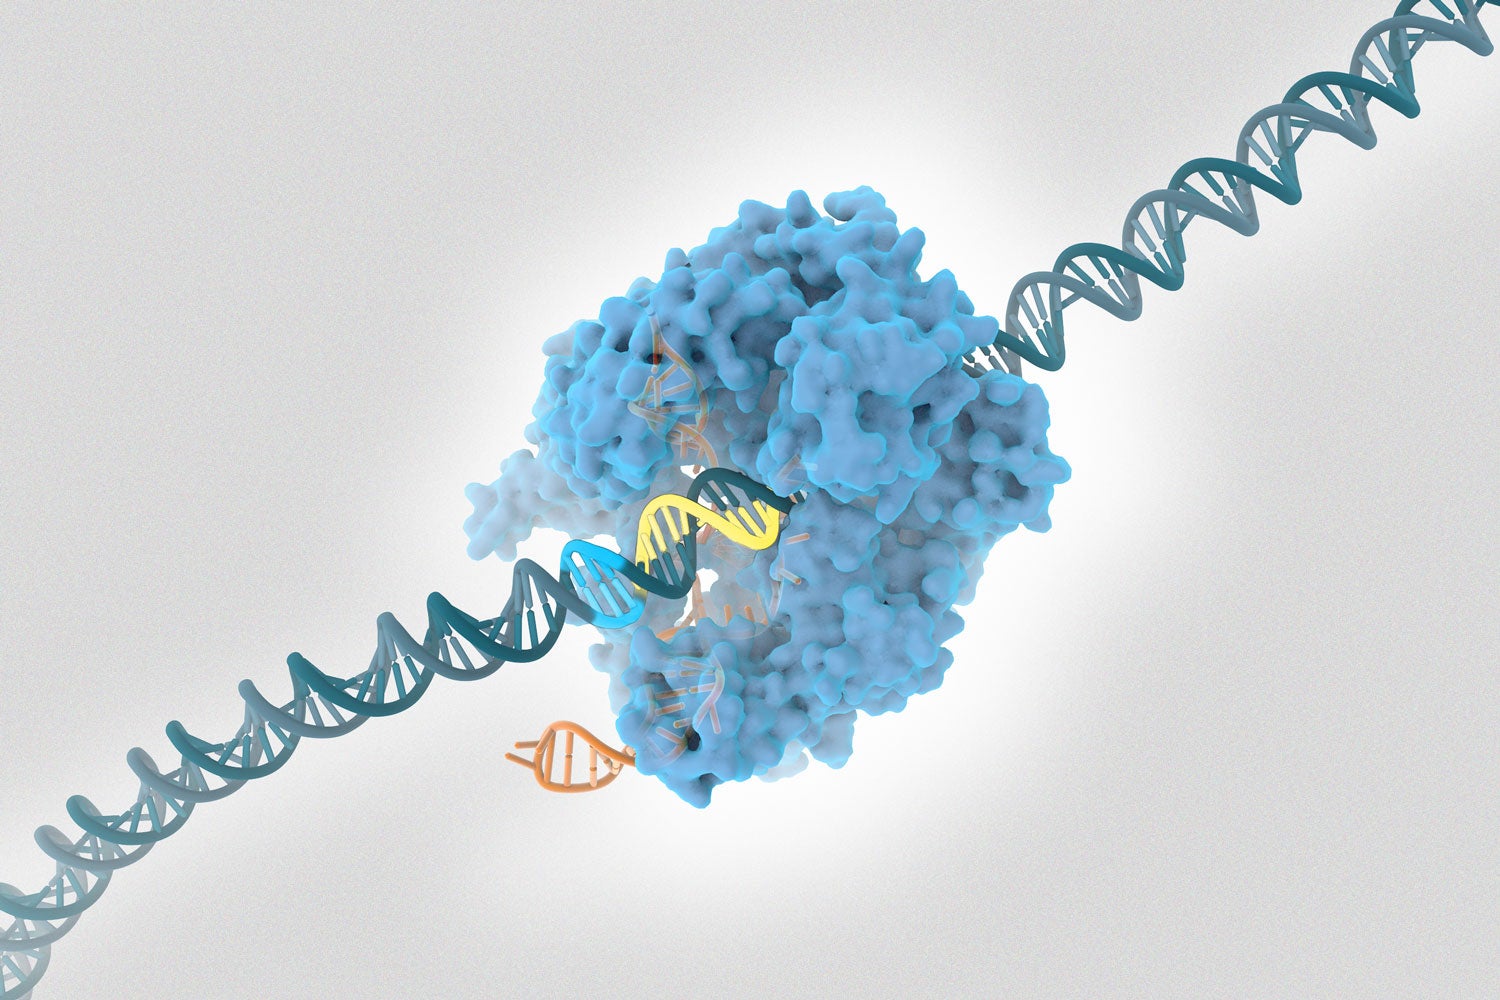 graphic showing how CRISPR technology works